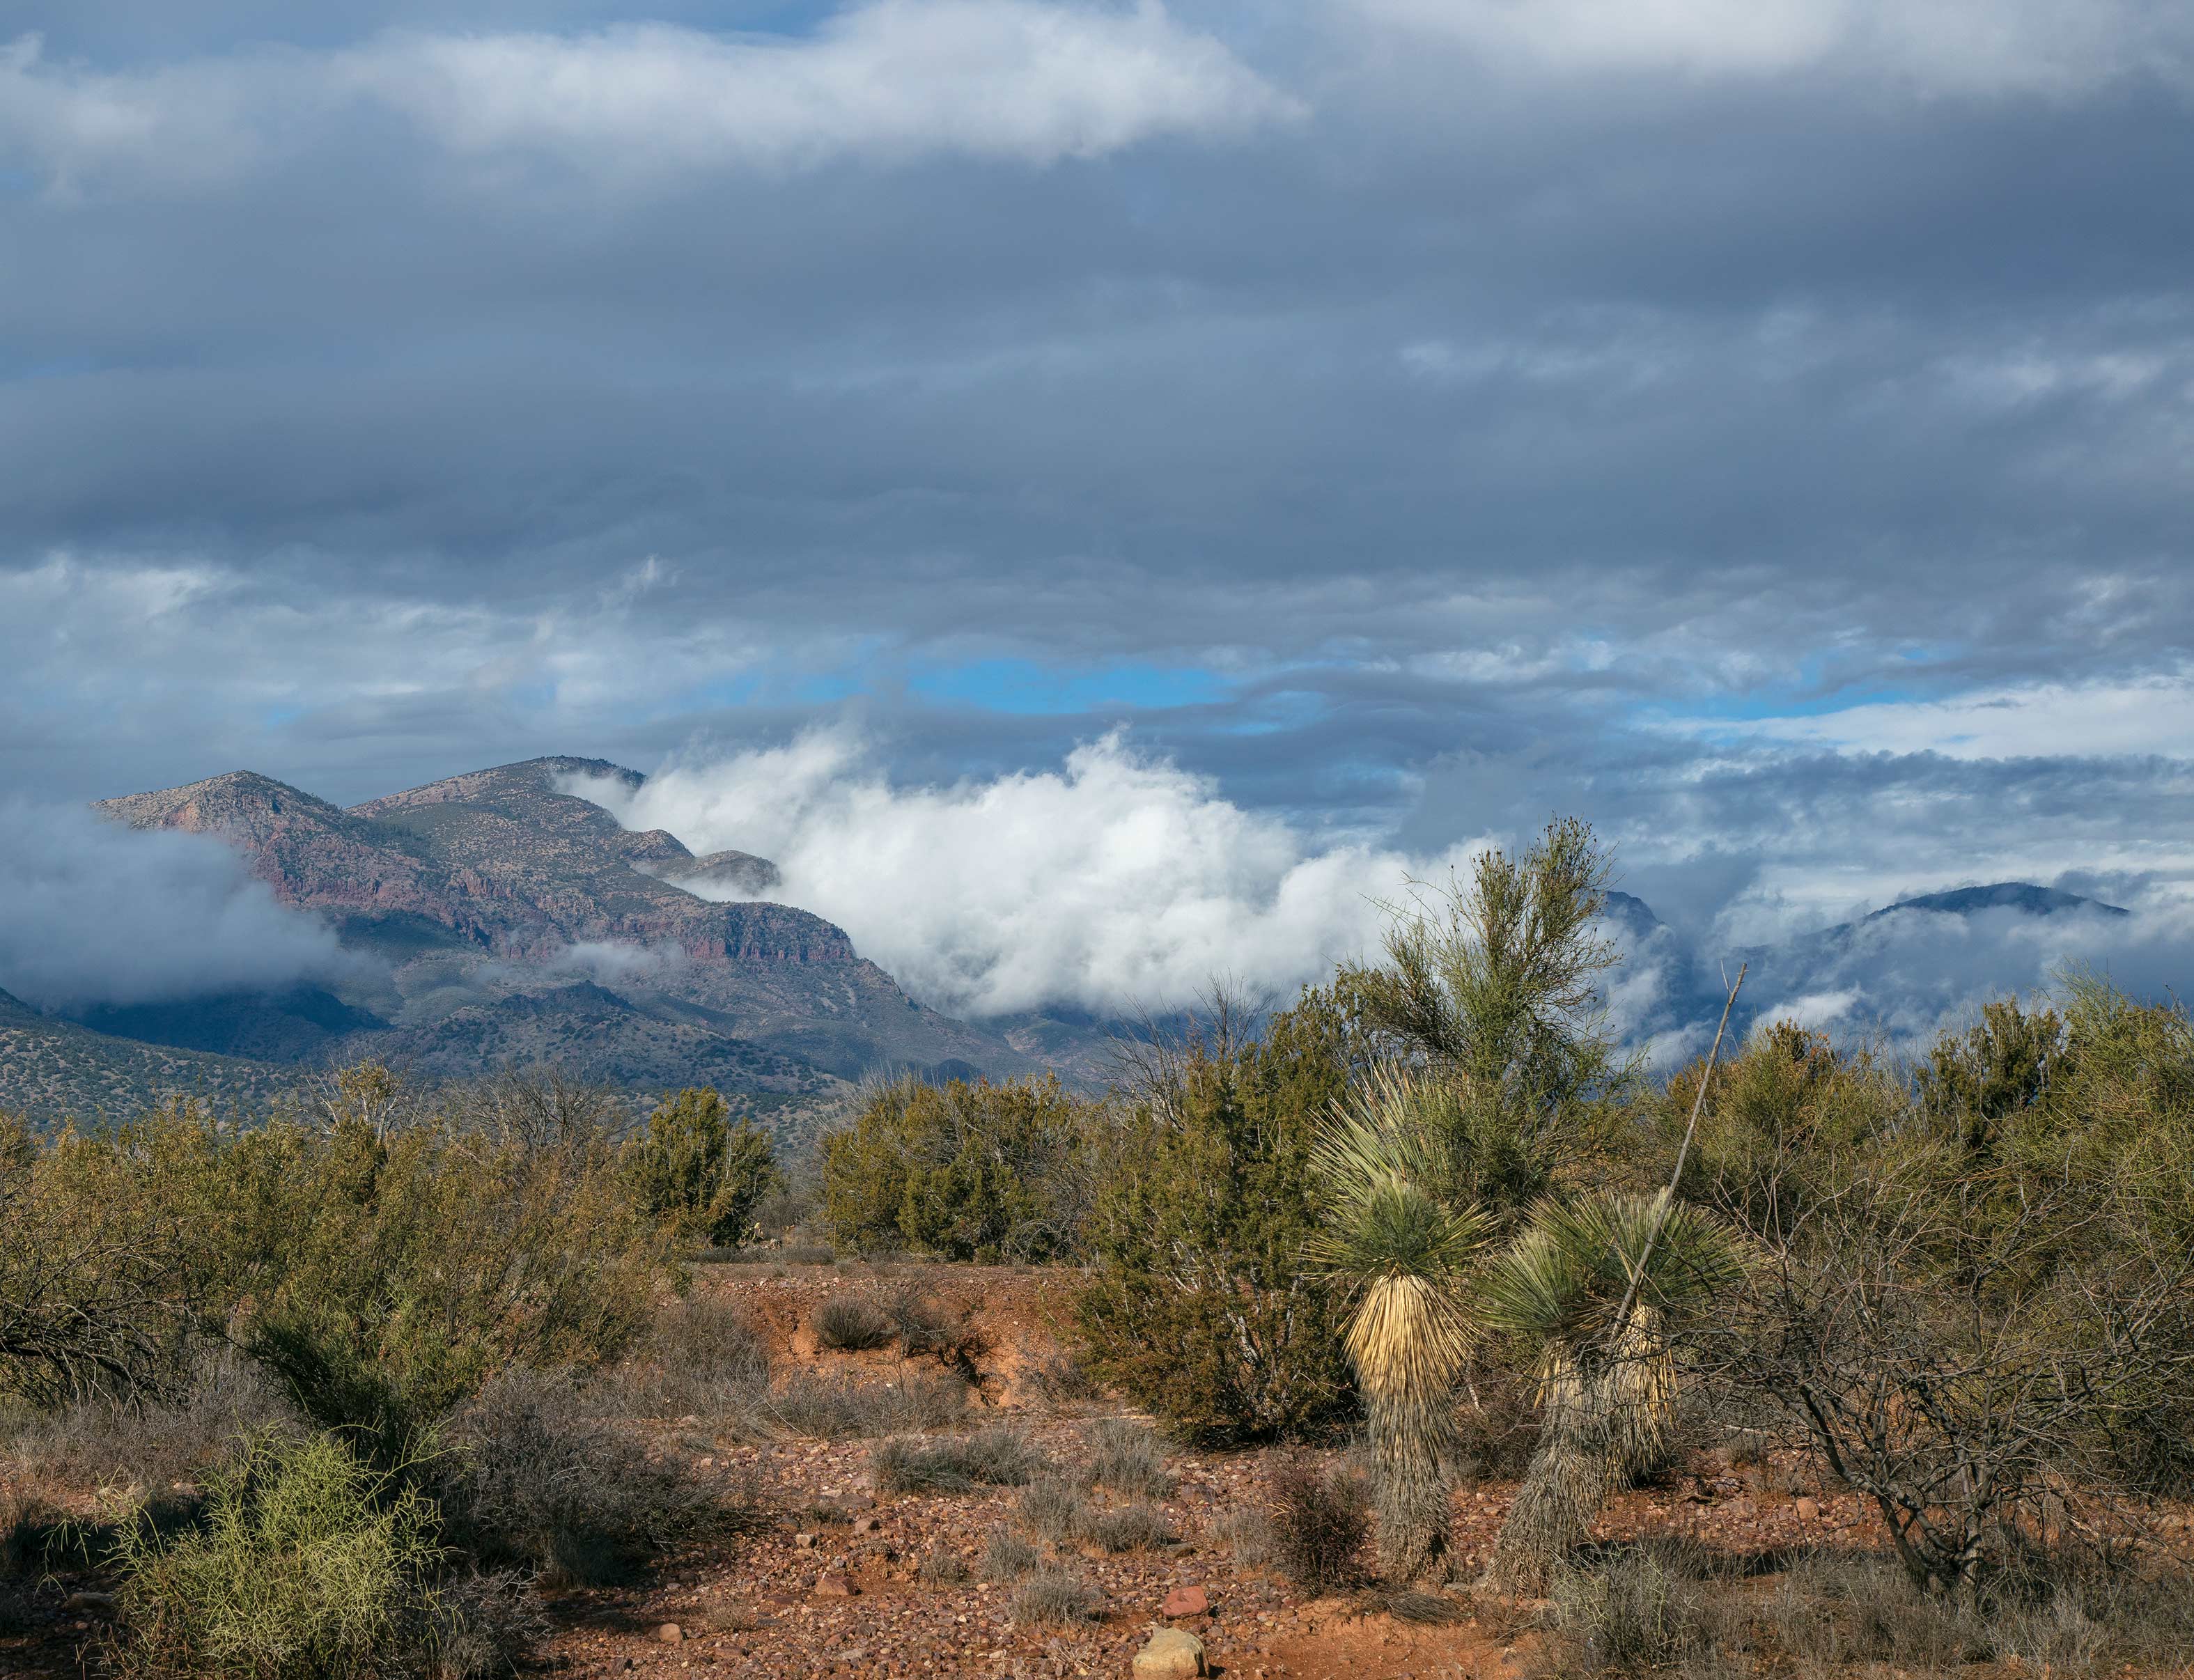 Clouds in mountains near Payson